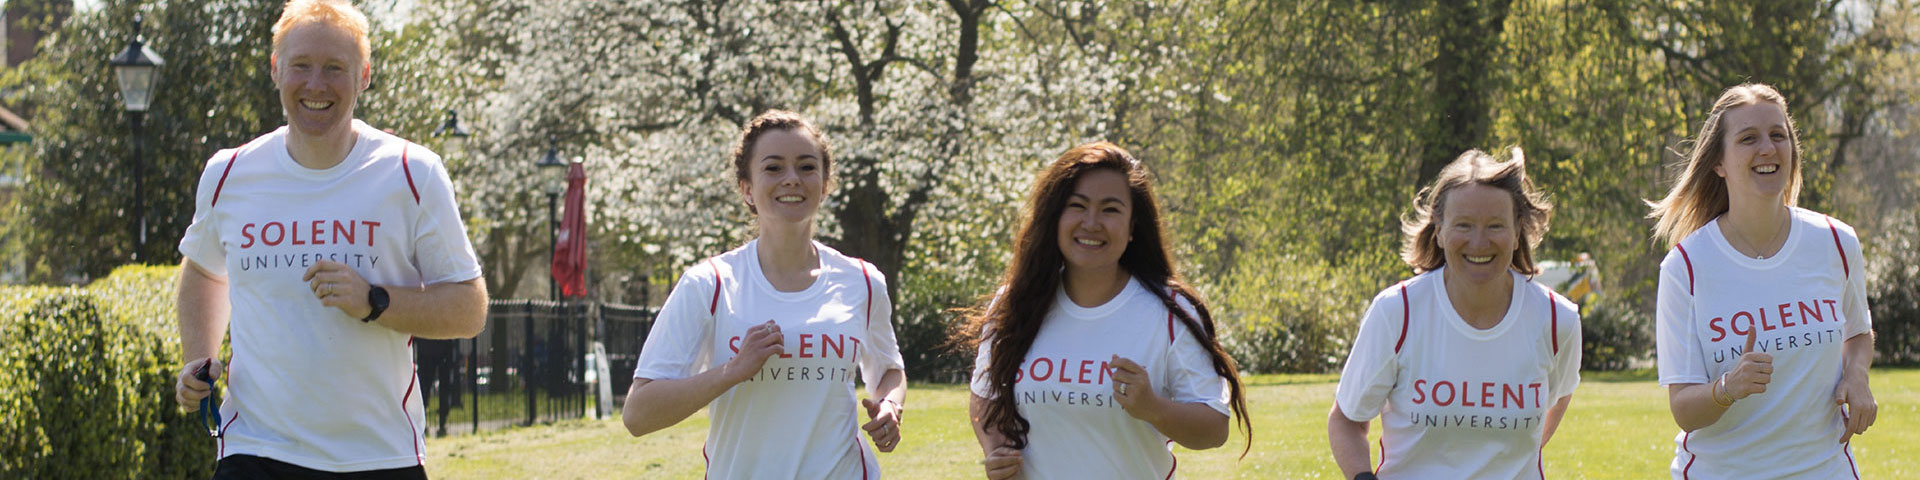 Five people run towards the camera across a park  wearing Solent University white t-shirts.